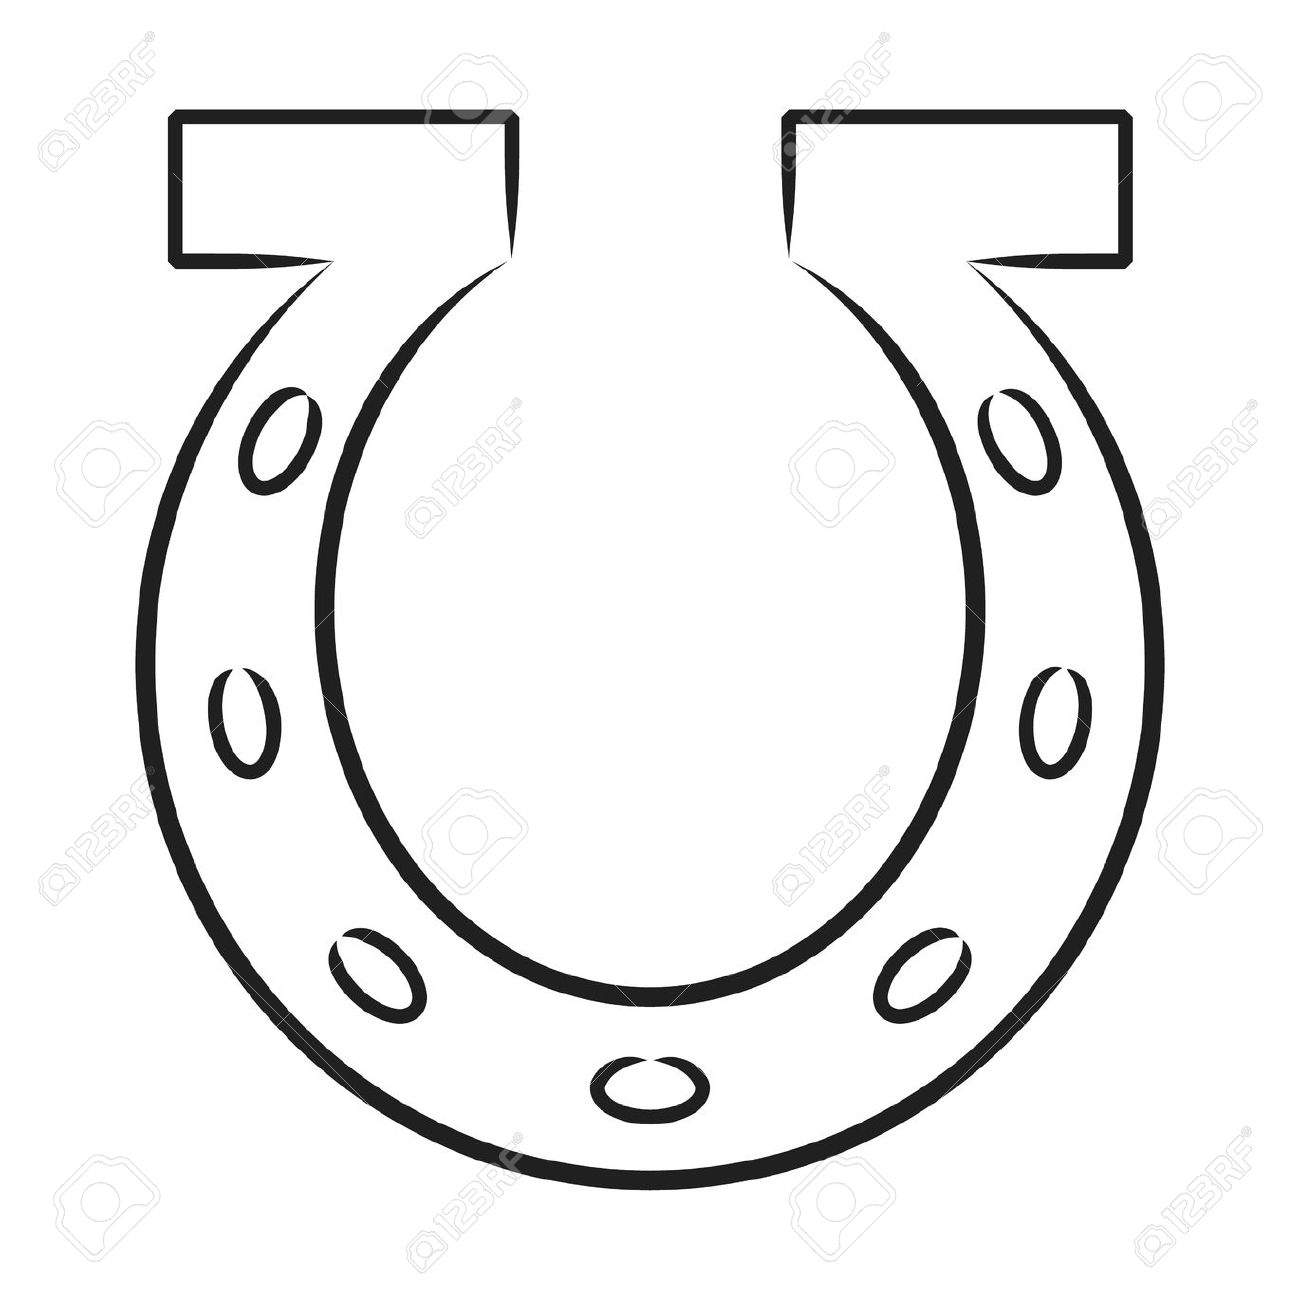 shoe outline clipart  free download on clipartmag